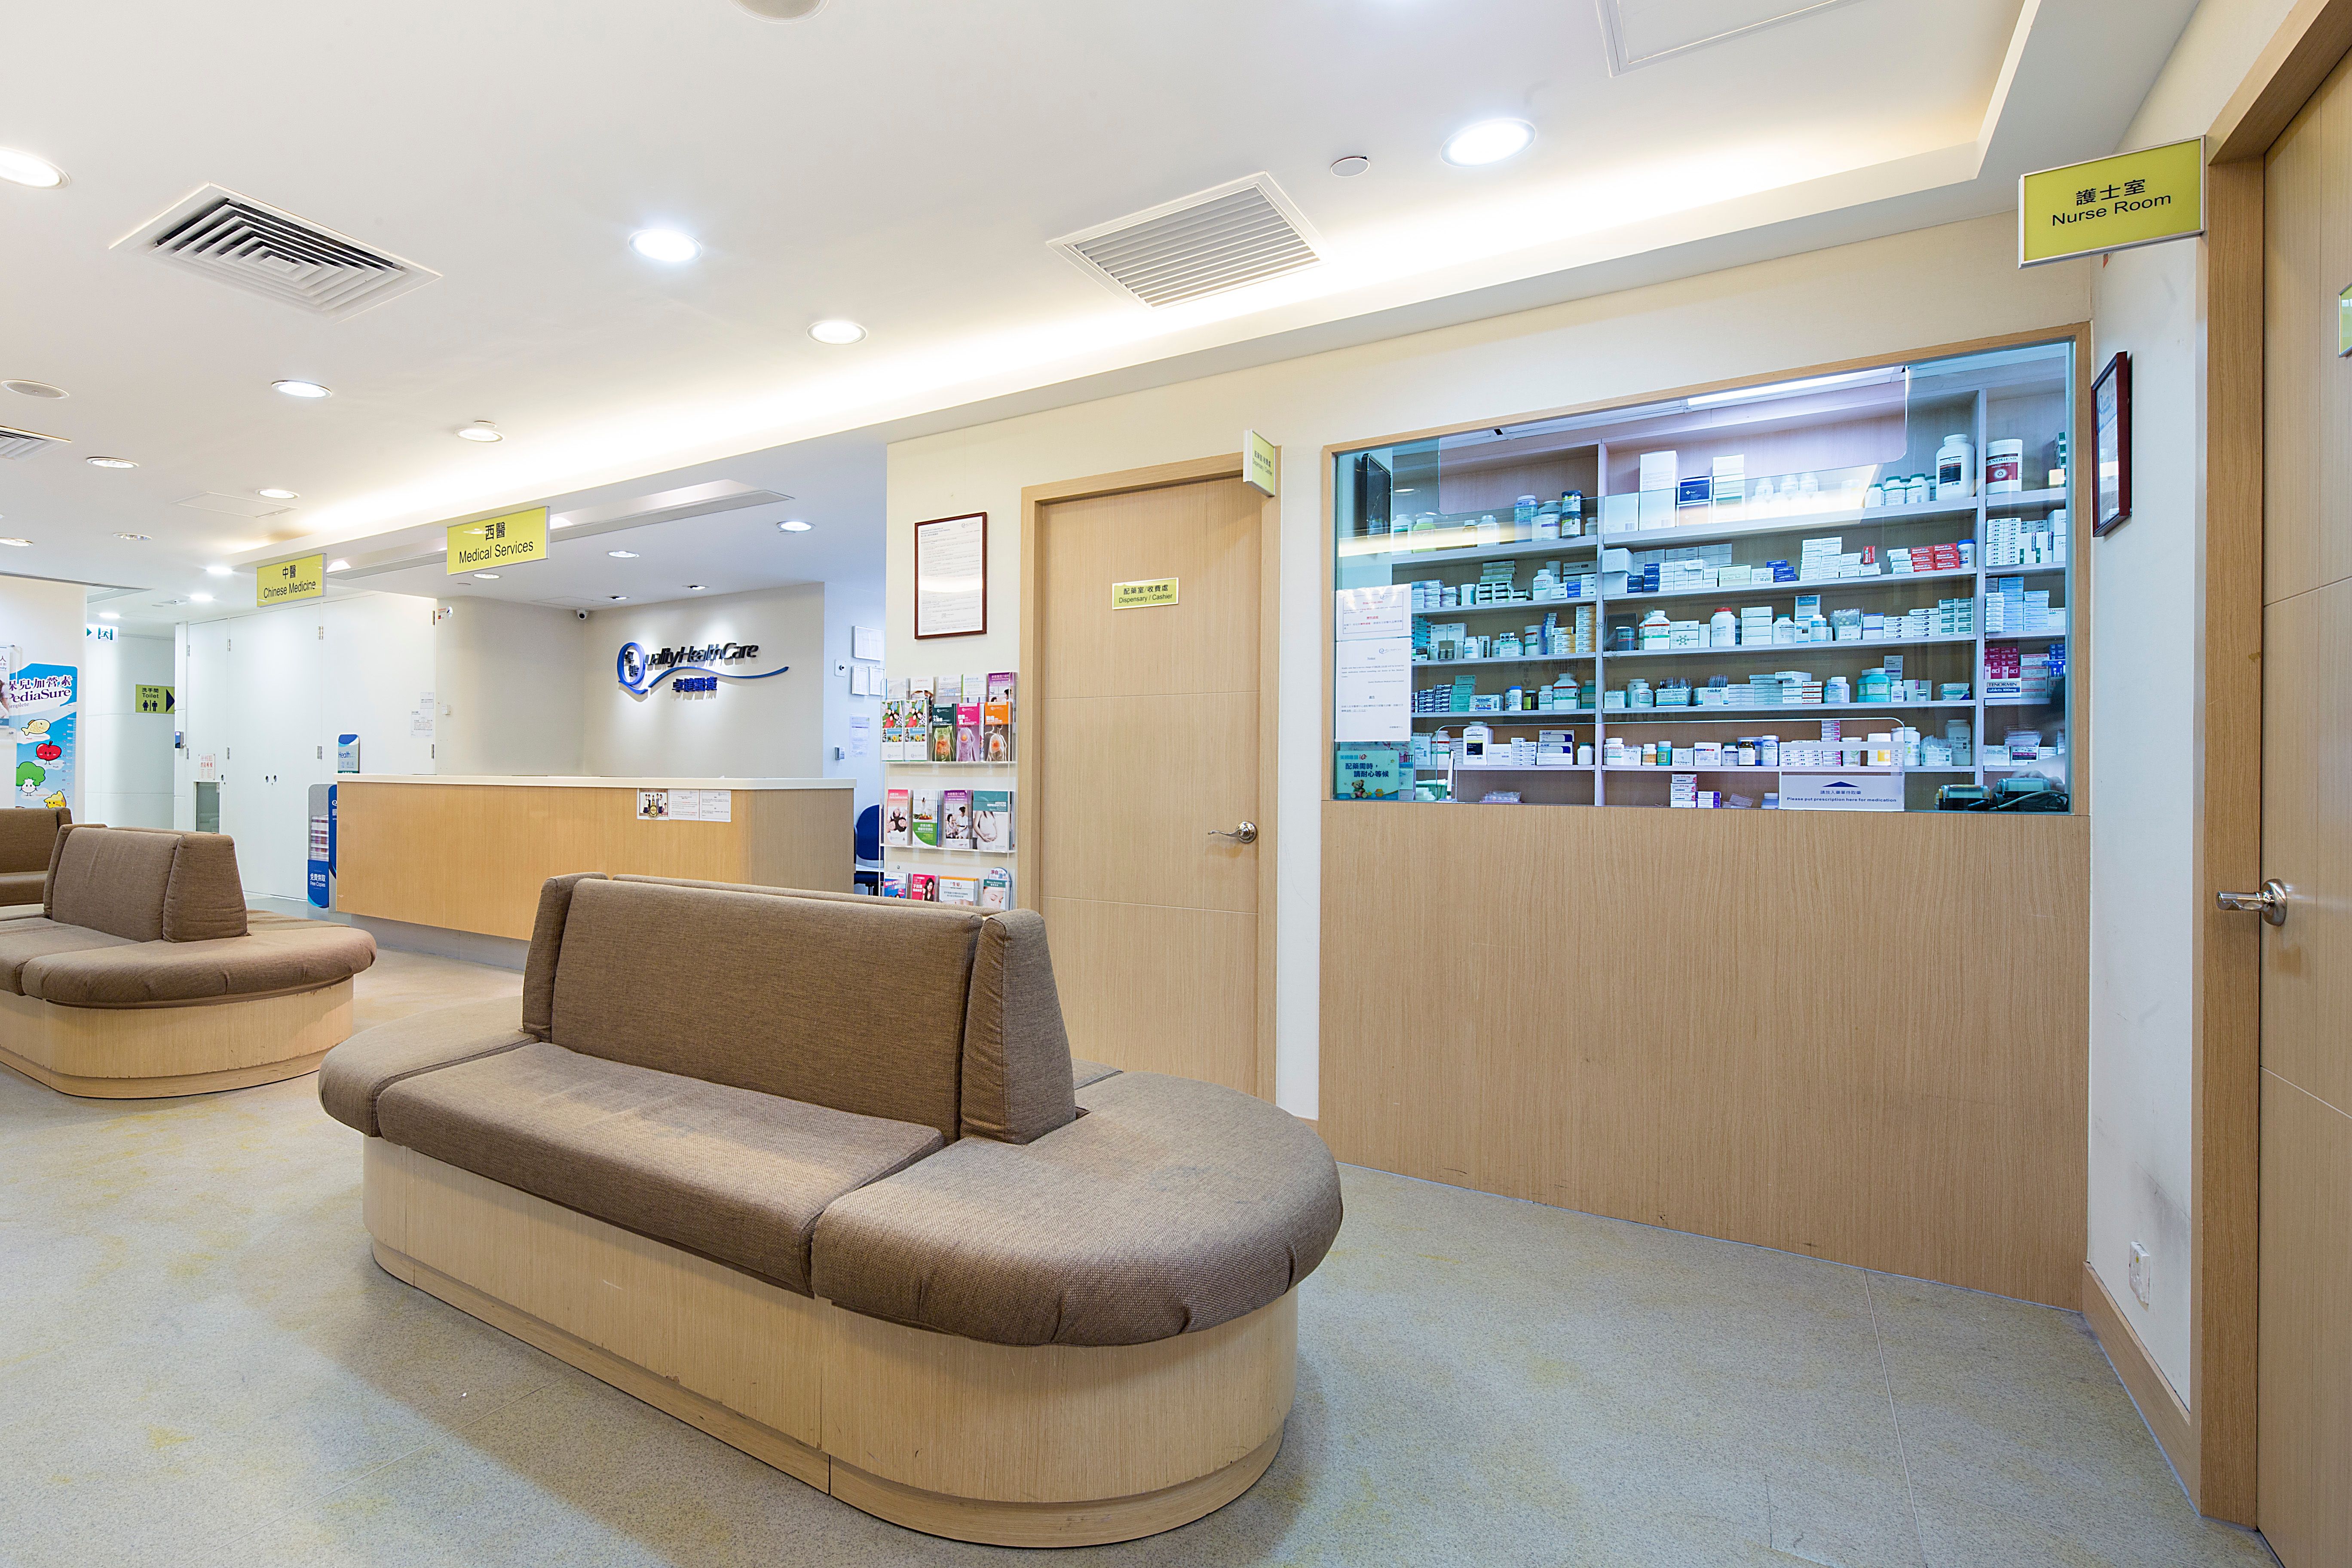 Quality HealthCare Medical Centre waiting area and dispensary